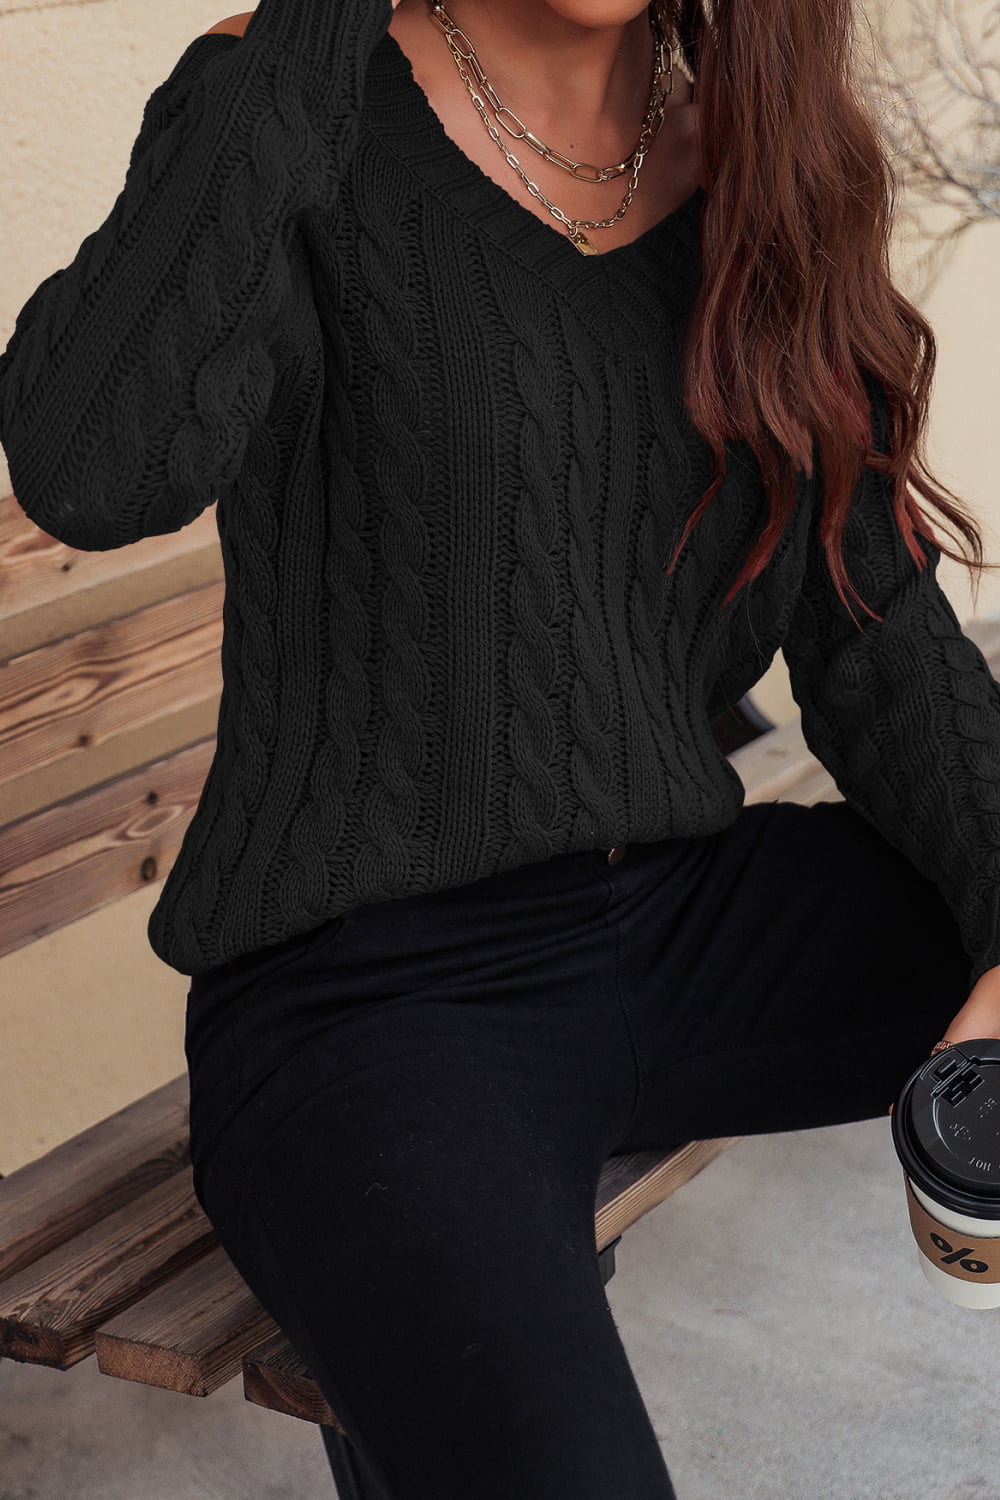 Women’s Cable-Knit Cold-Shoulder Long Sleeve Sweater